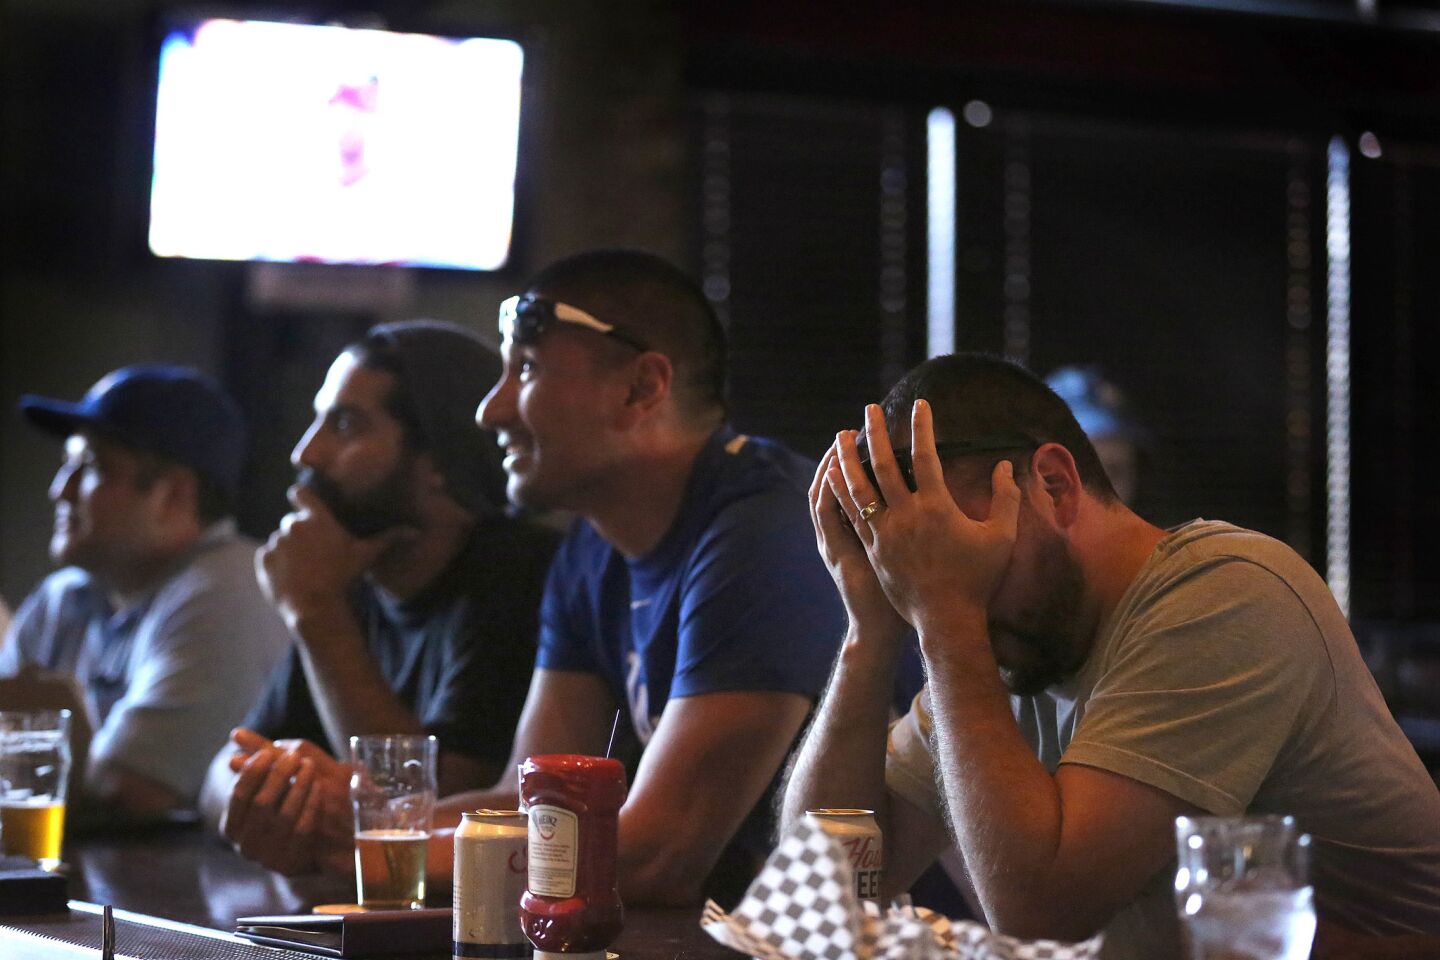 George Montejano, 33, of South Pasadena, can't bear to watch as the Dodgers temporariliy lose their lead against the Nationals.